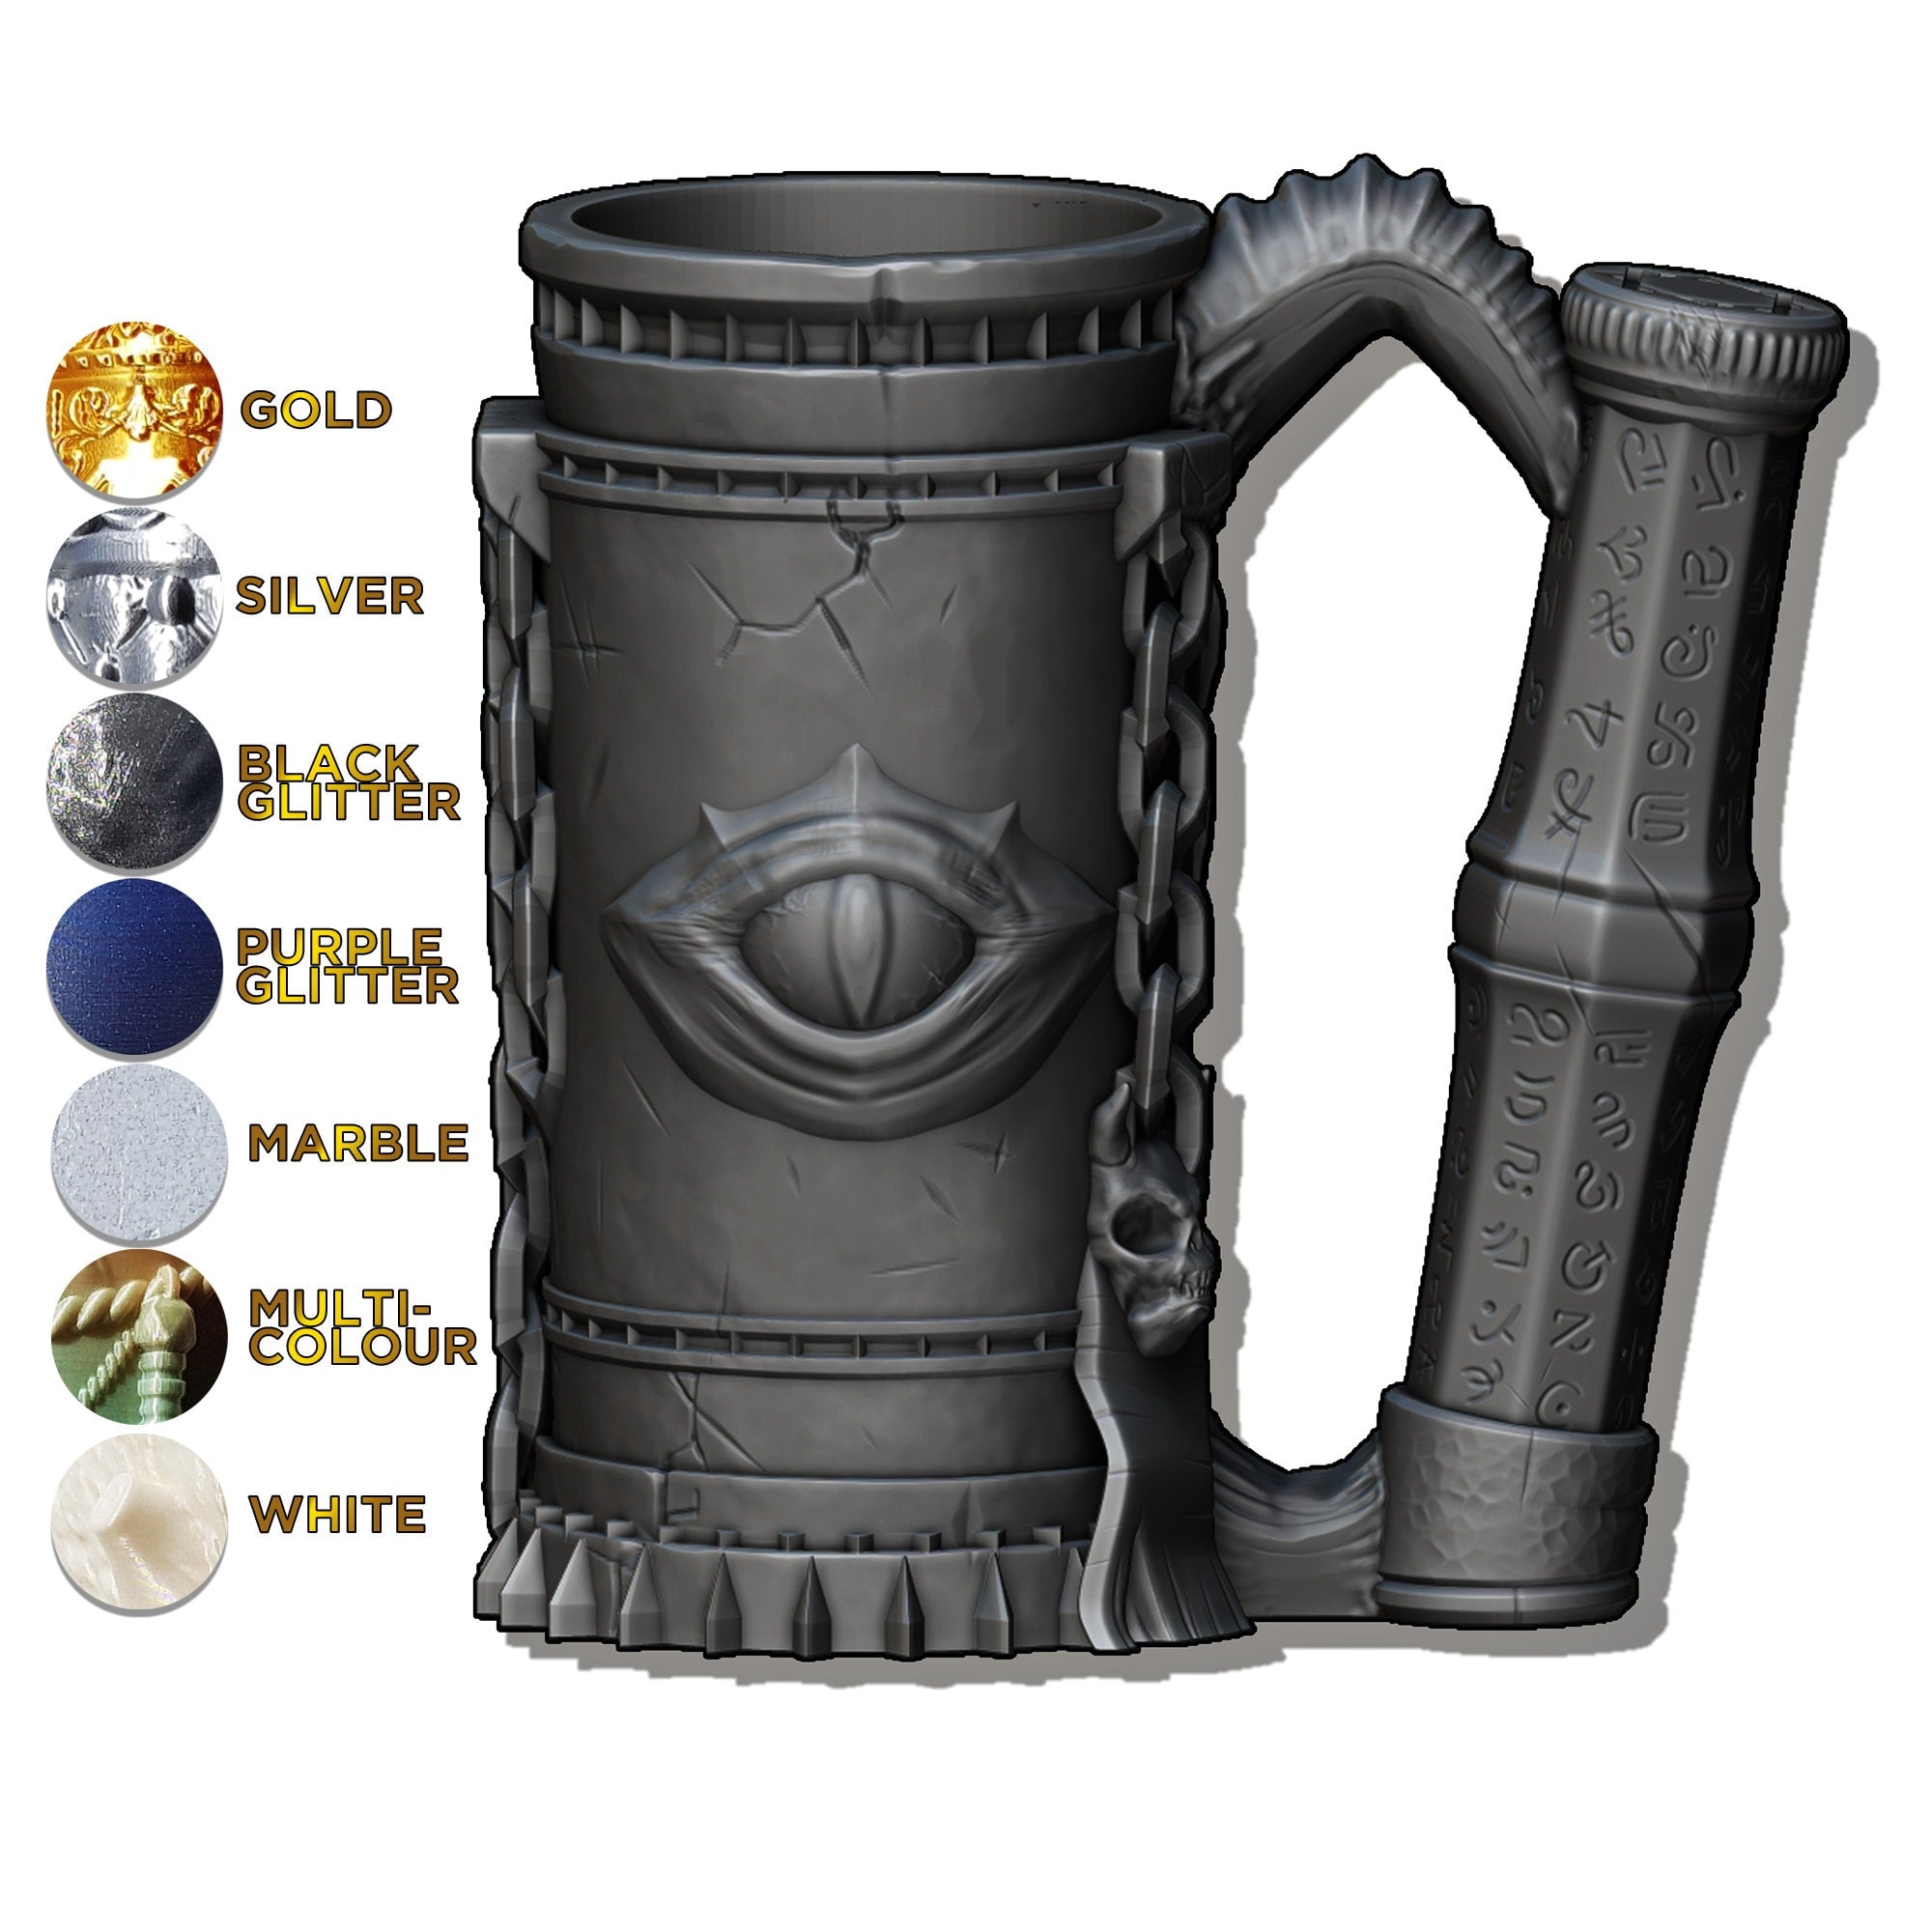 The WARLOCK | Mythic Mug | Larp | Gaming Zubehör | Tabletop | Dice Cup | Box | Holder-Role Playing Games